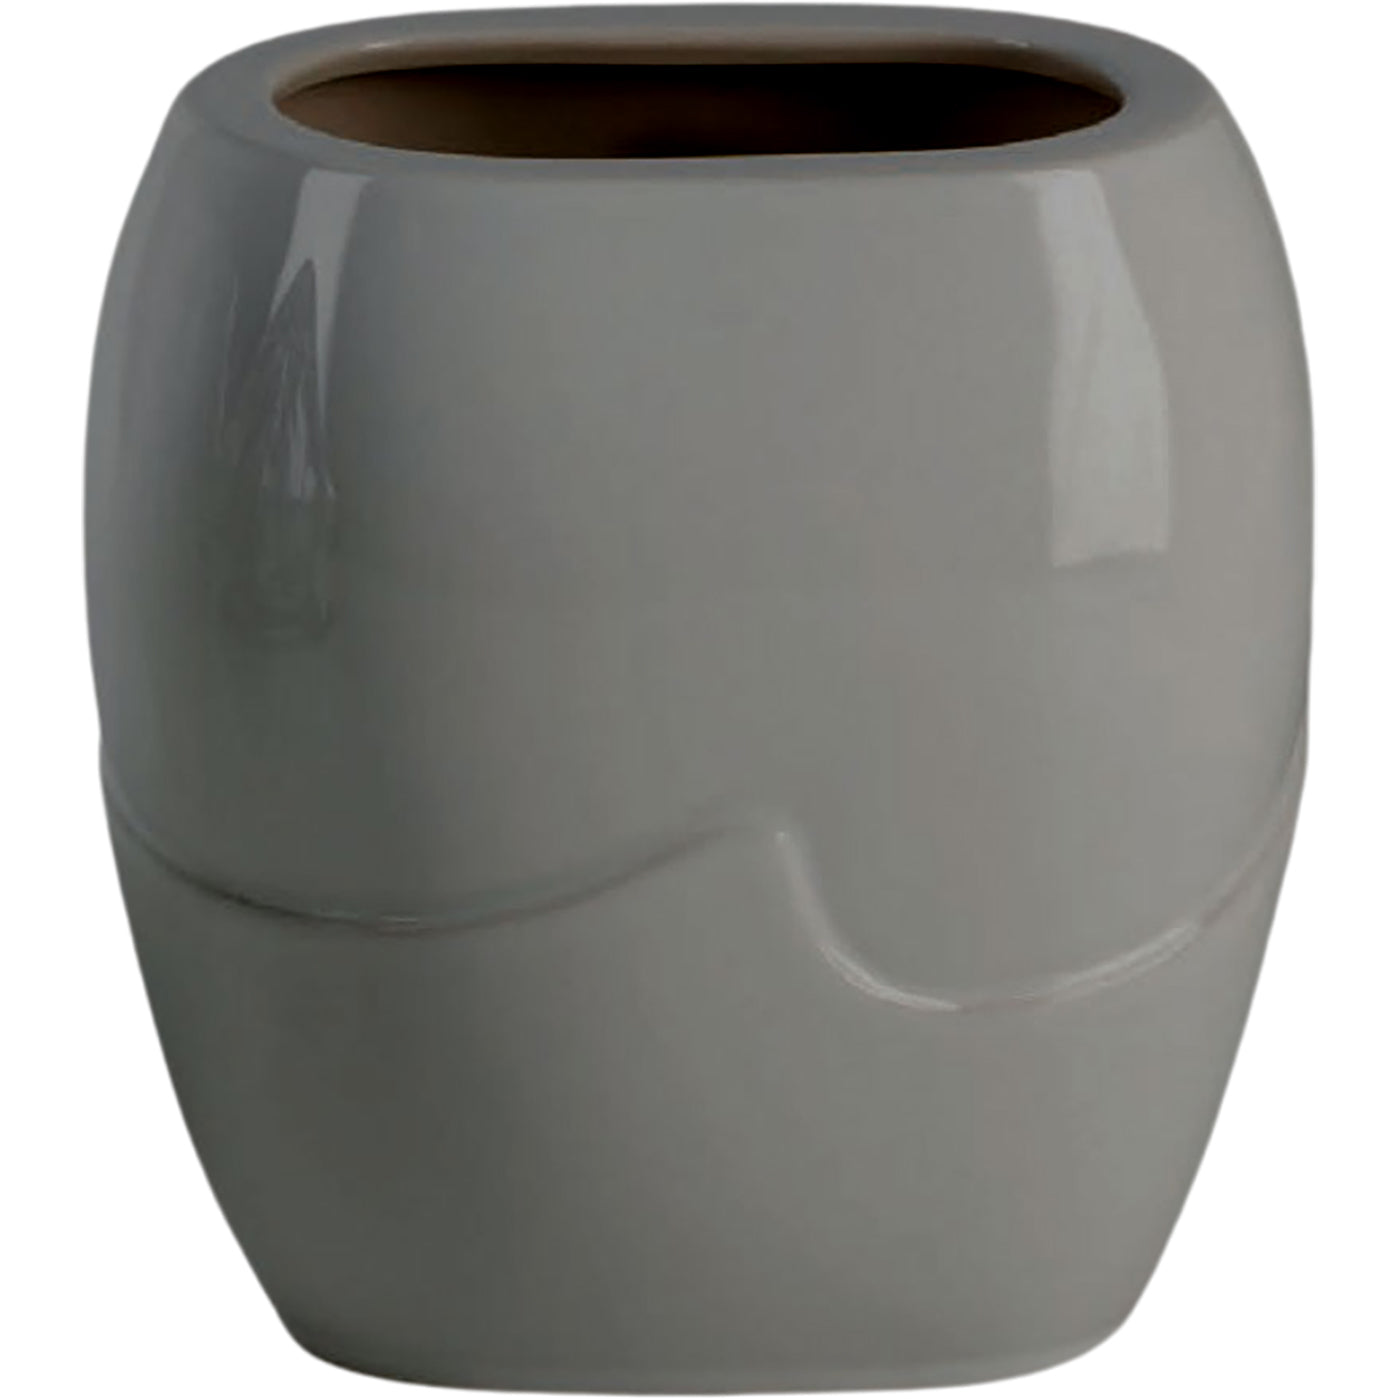 Rectangular grave vase Onda gray 19x17cm - 7.5x6.7in In gray porcelain, wall attached ON166P/G